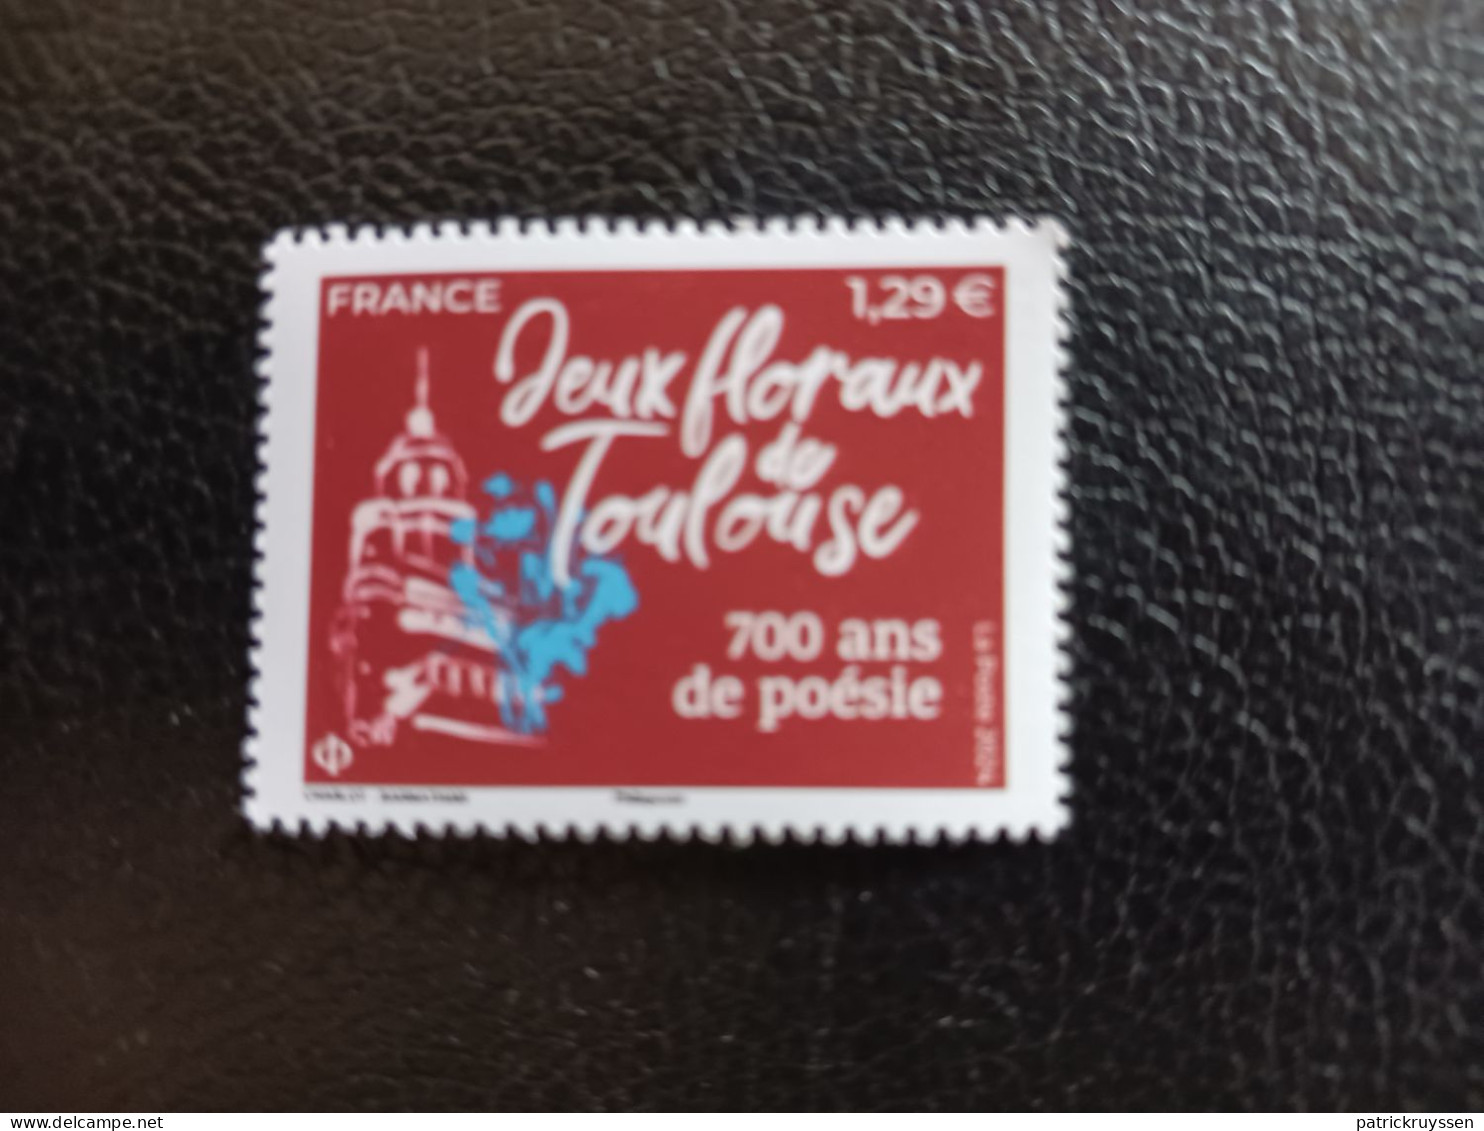 France 2024 Toulouse Floral Games 700 Years Poetry 1324 Golden Violet Jeux Loraux 1v Mnh - Neufs